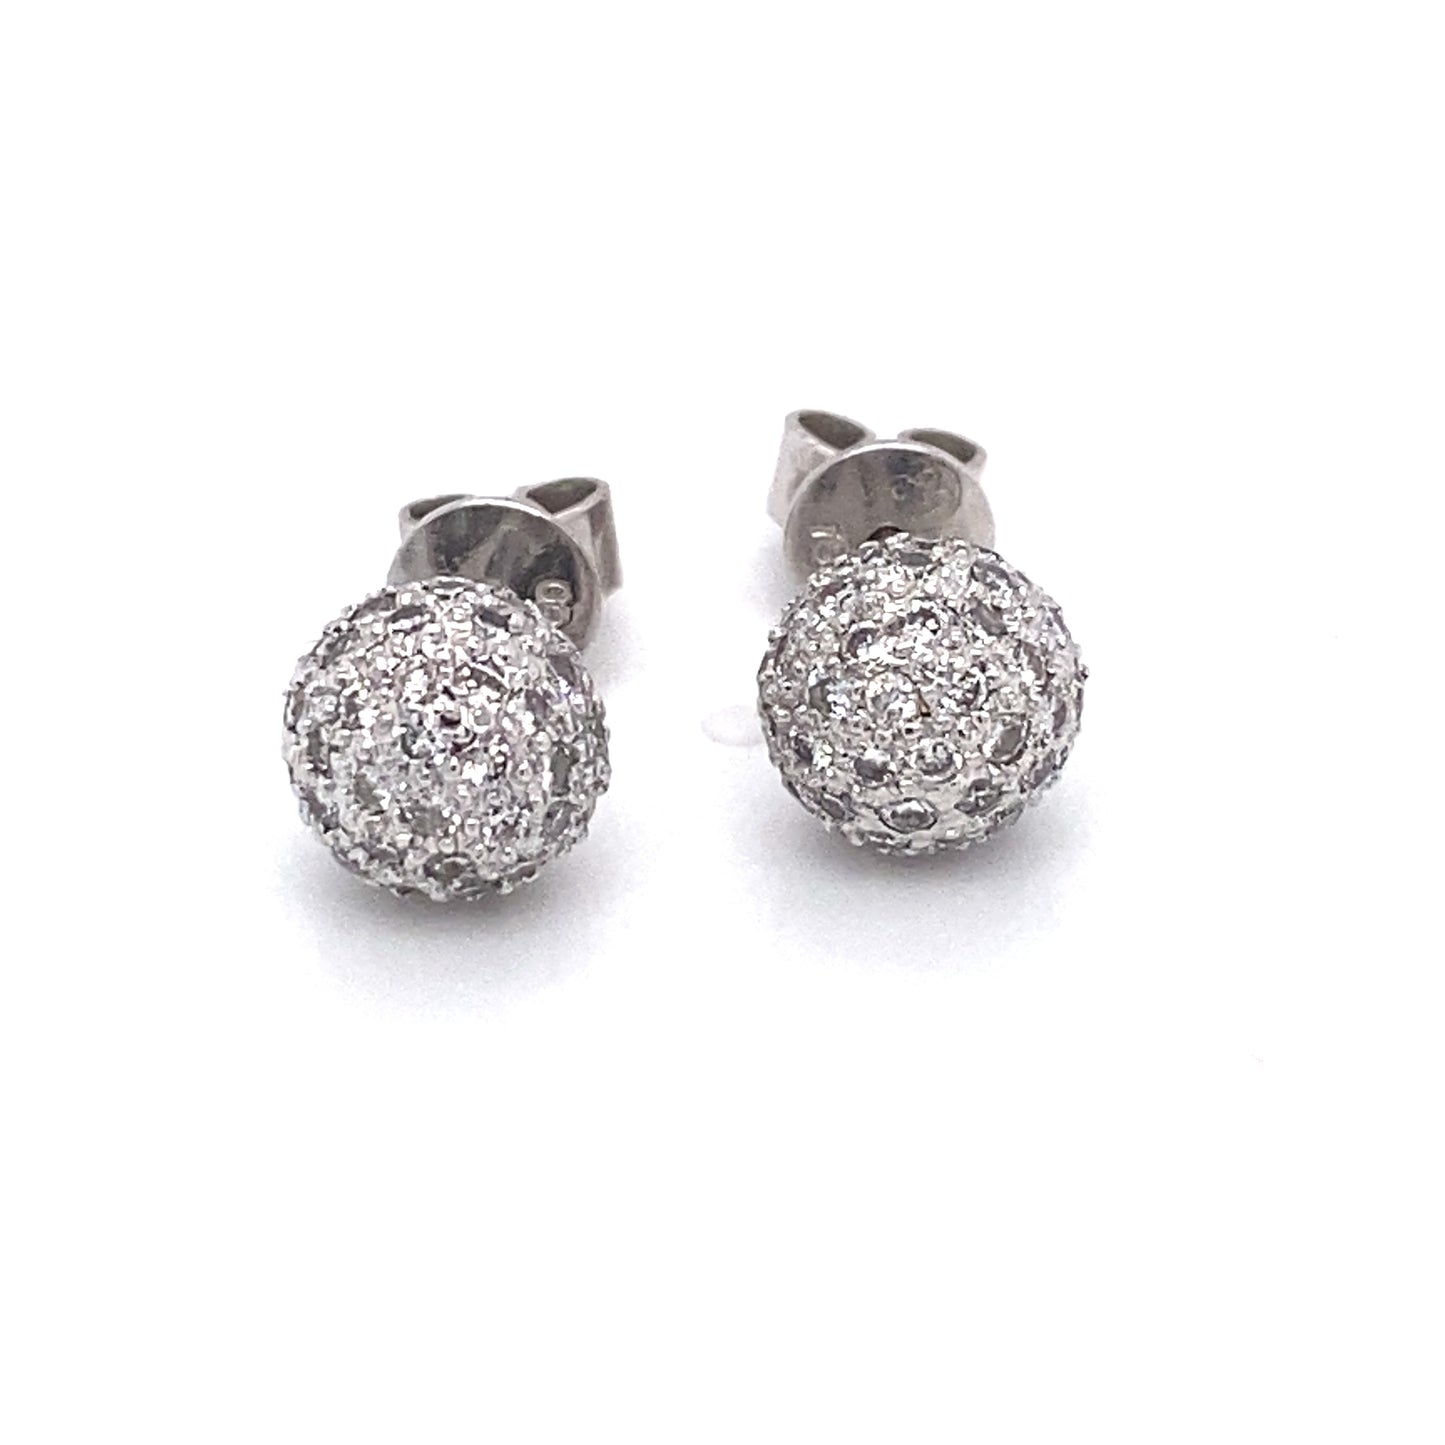 Circa 1960 1.0 CTW Pave Diamond Button Earrings in 18K White Gold